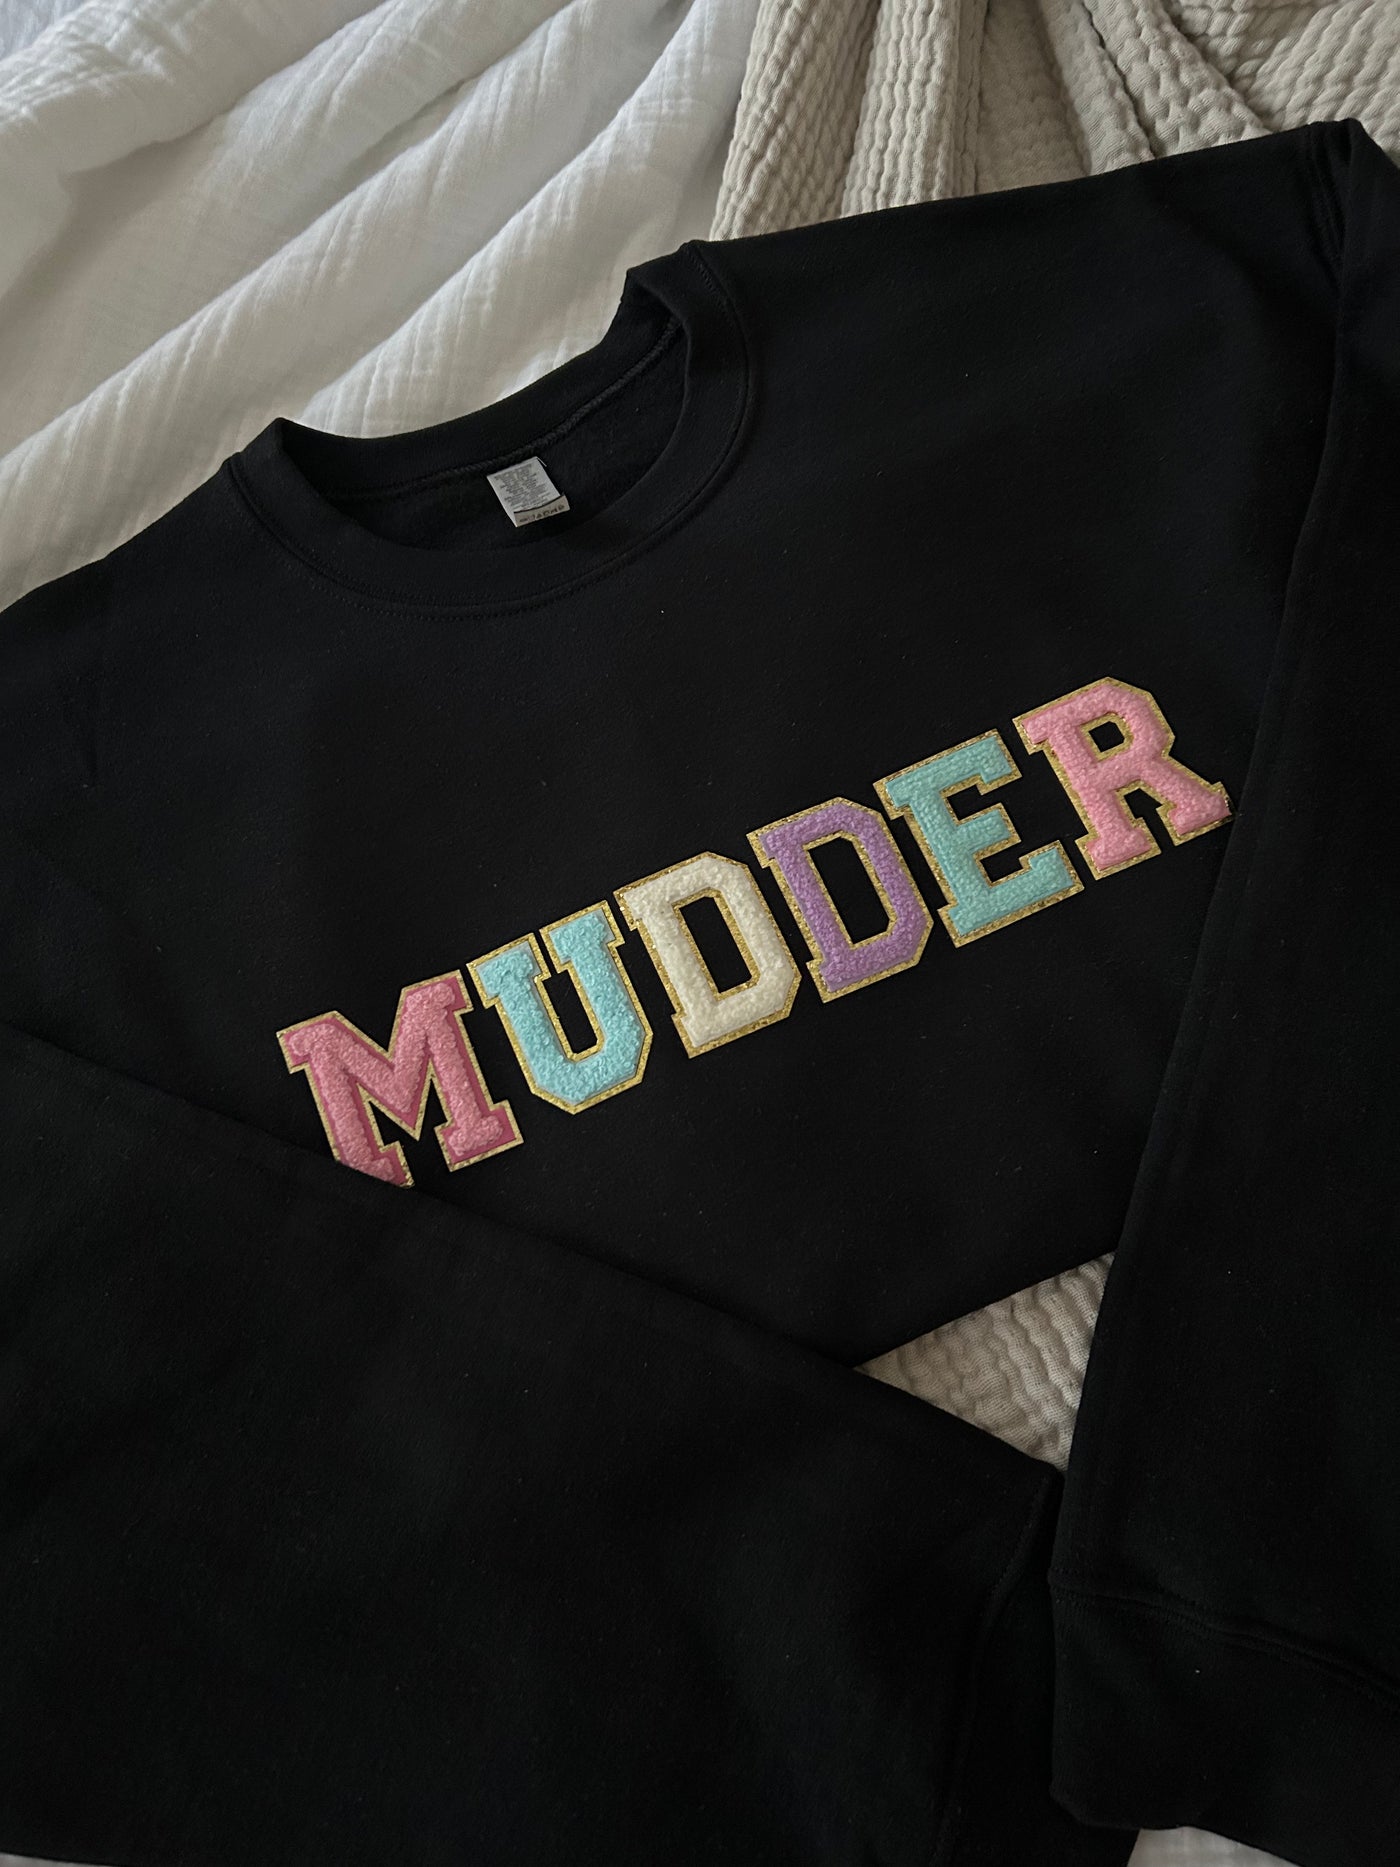 *PRE ORDER* (Ready Early April) "MUDDER" Chenille Patch Unisex Crewneck